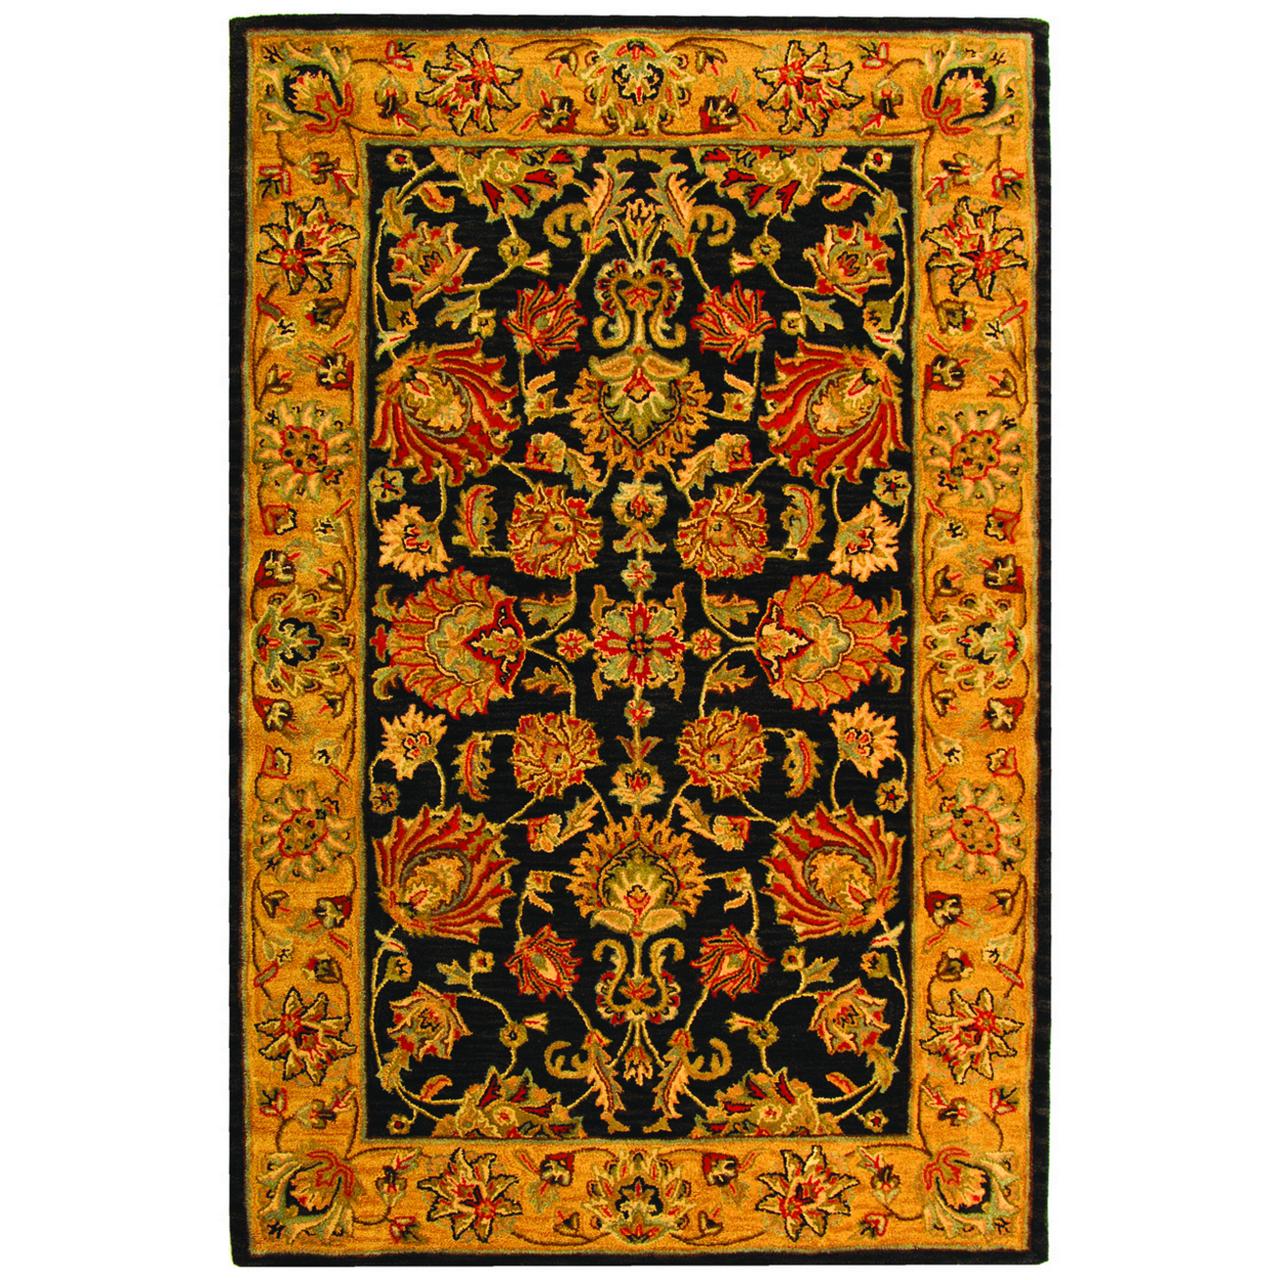 SAFAVIEH Heritage Regis Traditional Wool Area Rug, Charcoal/Gold, 5' x 8' - image 1 of 10